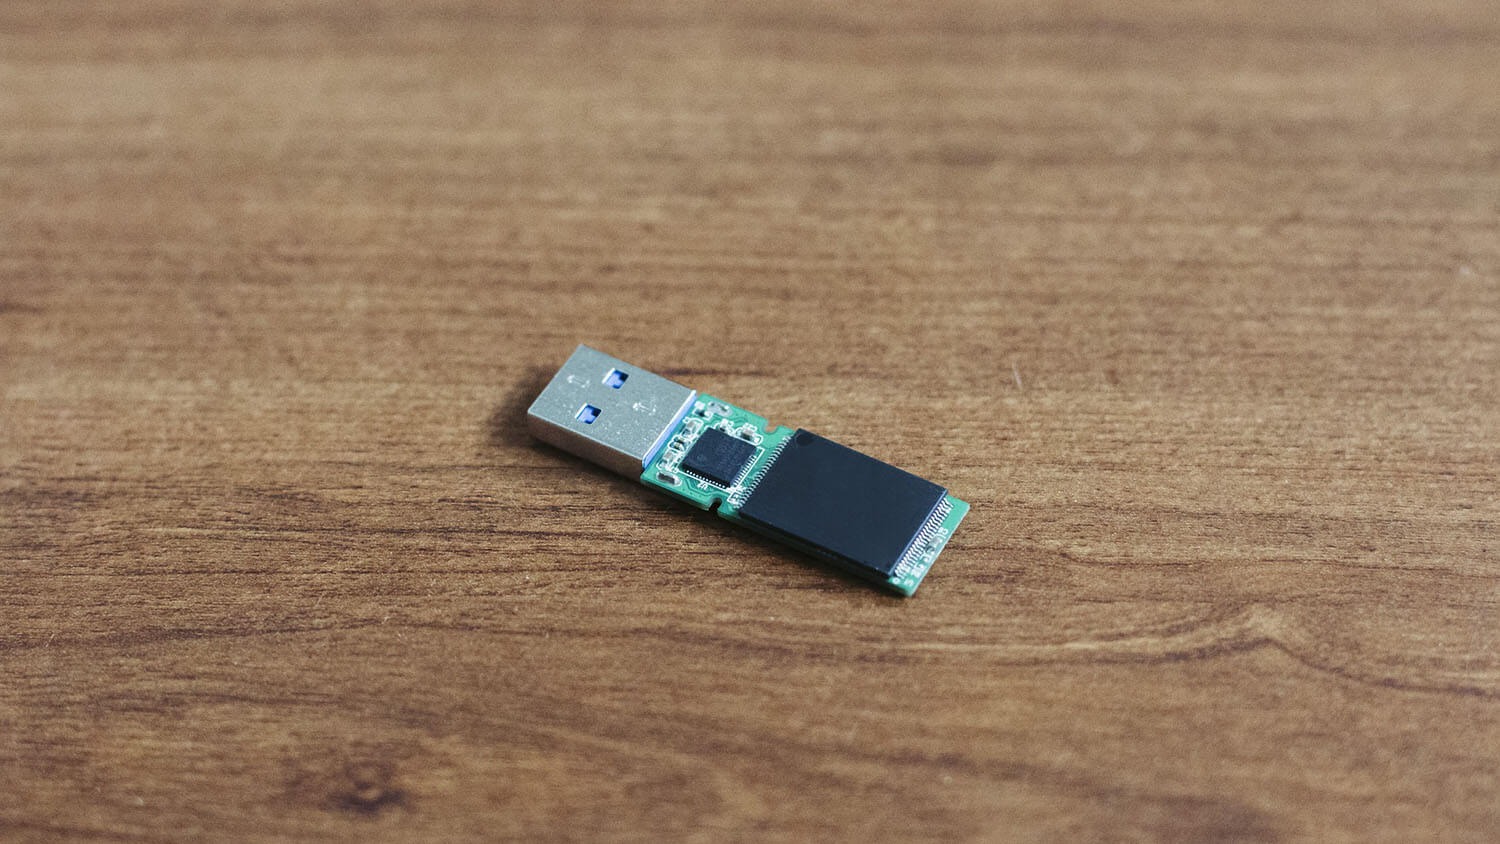 how to format usb drive in fat32 for windows 10